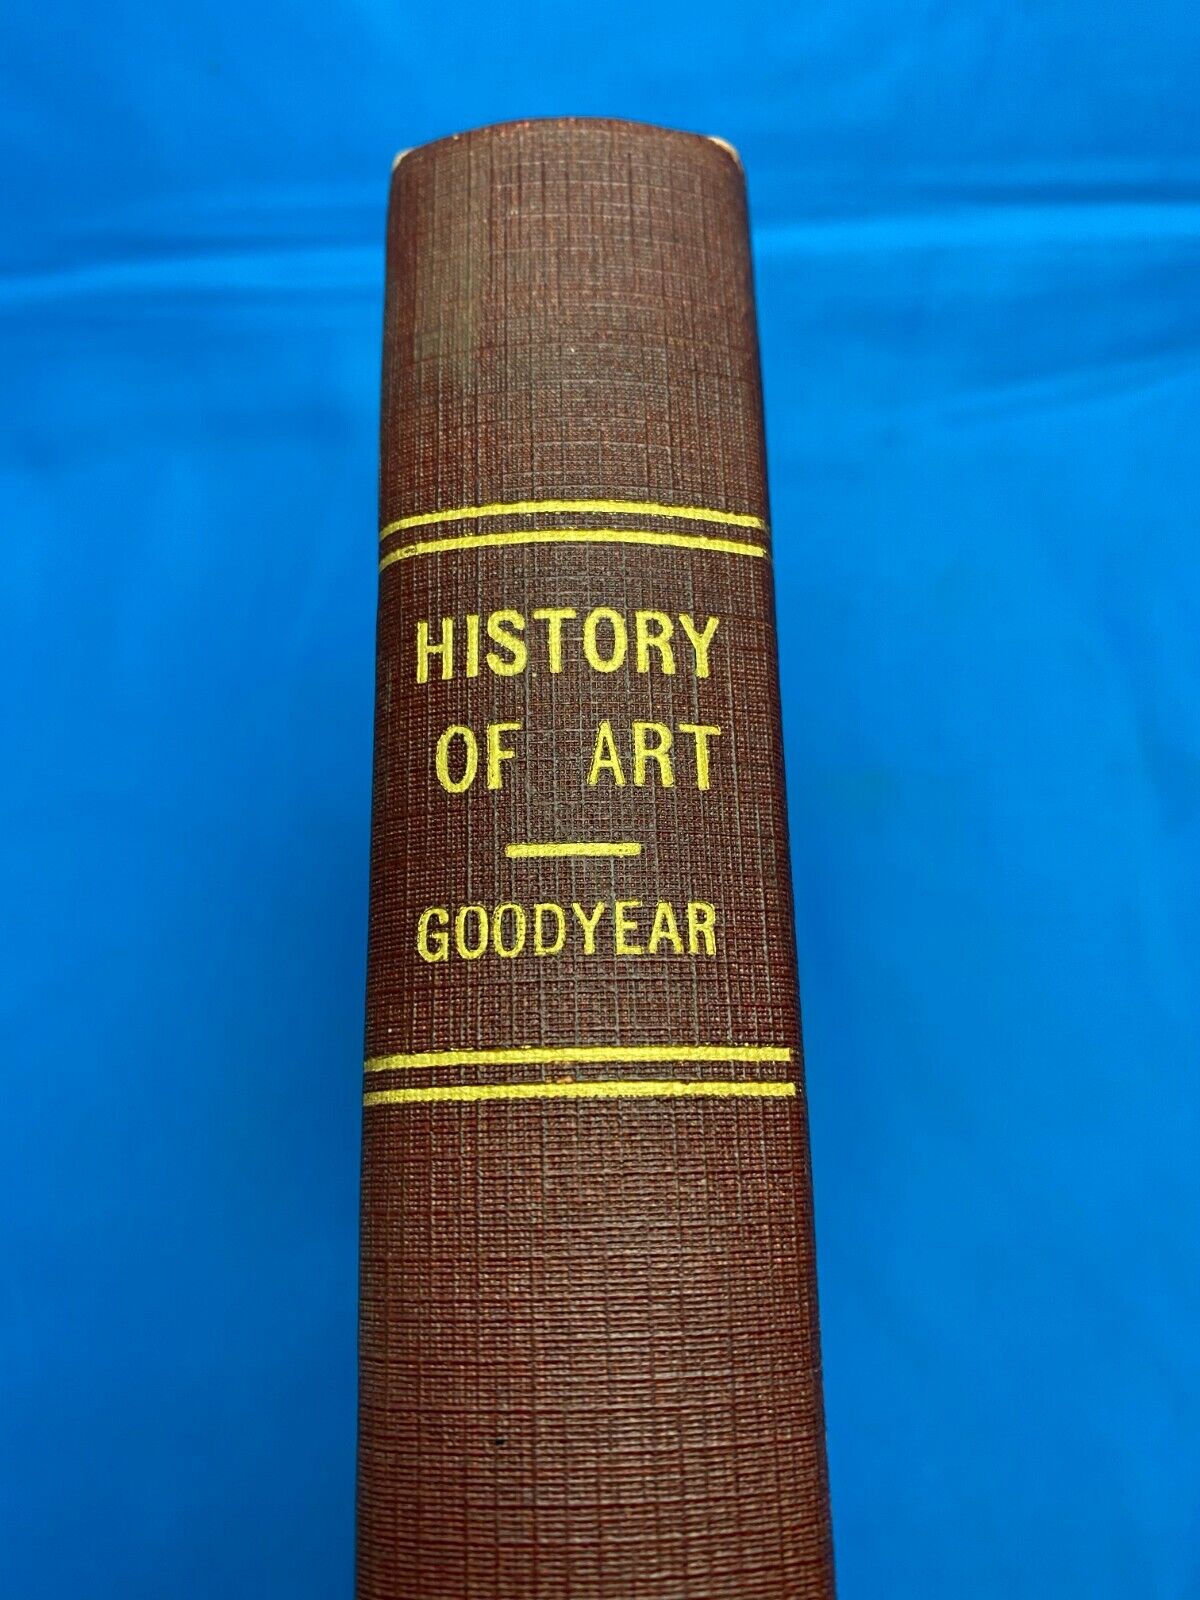 1896 HISTORY OF ART by William H Goodyear f Classes, Student & Tourist in Europe